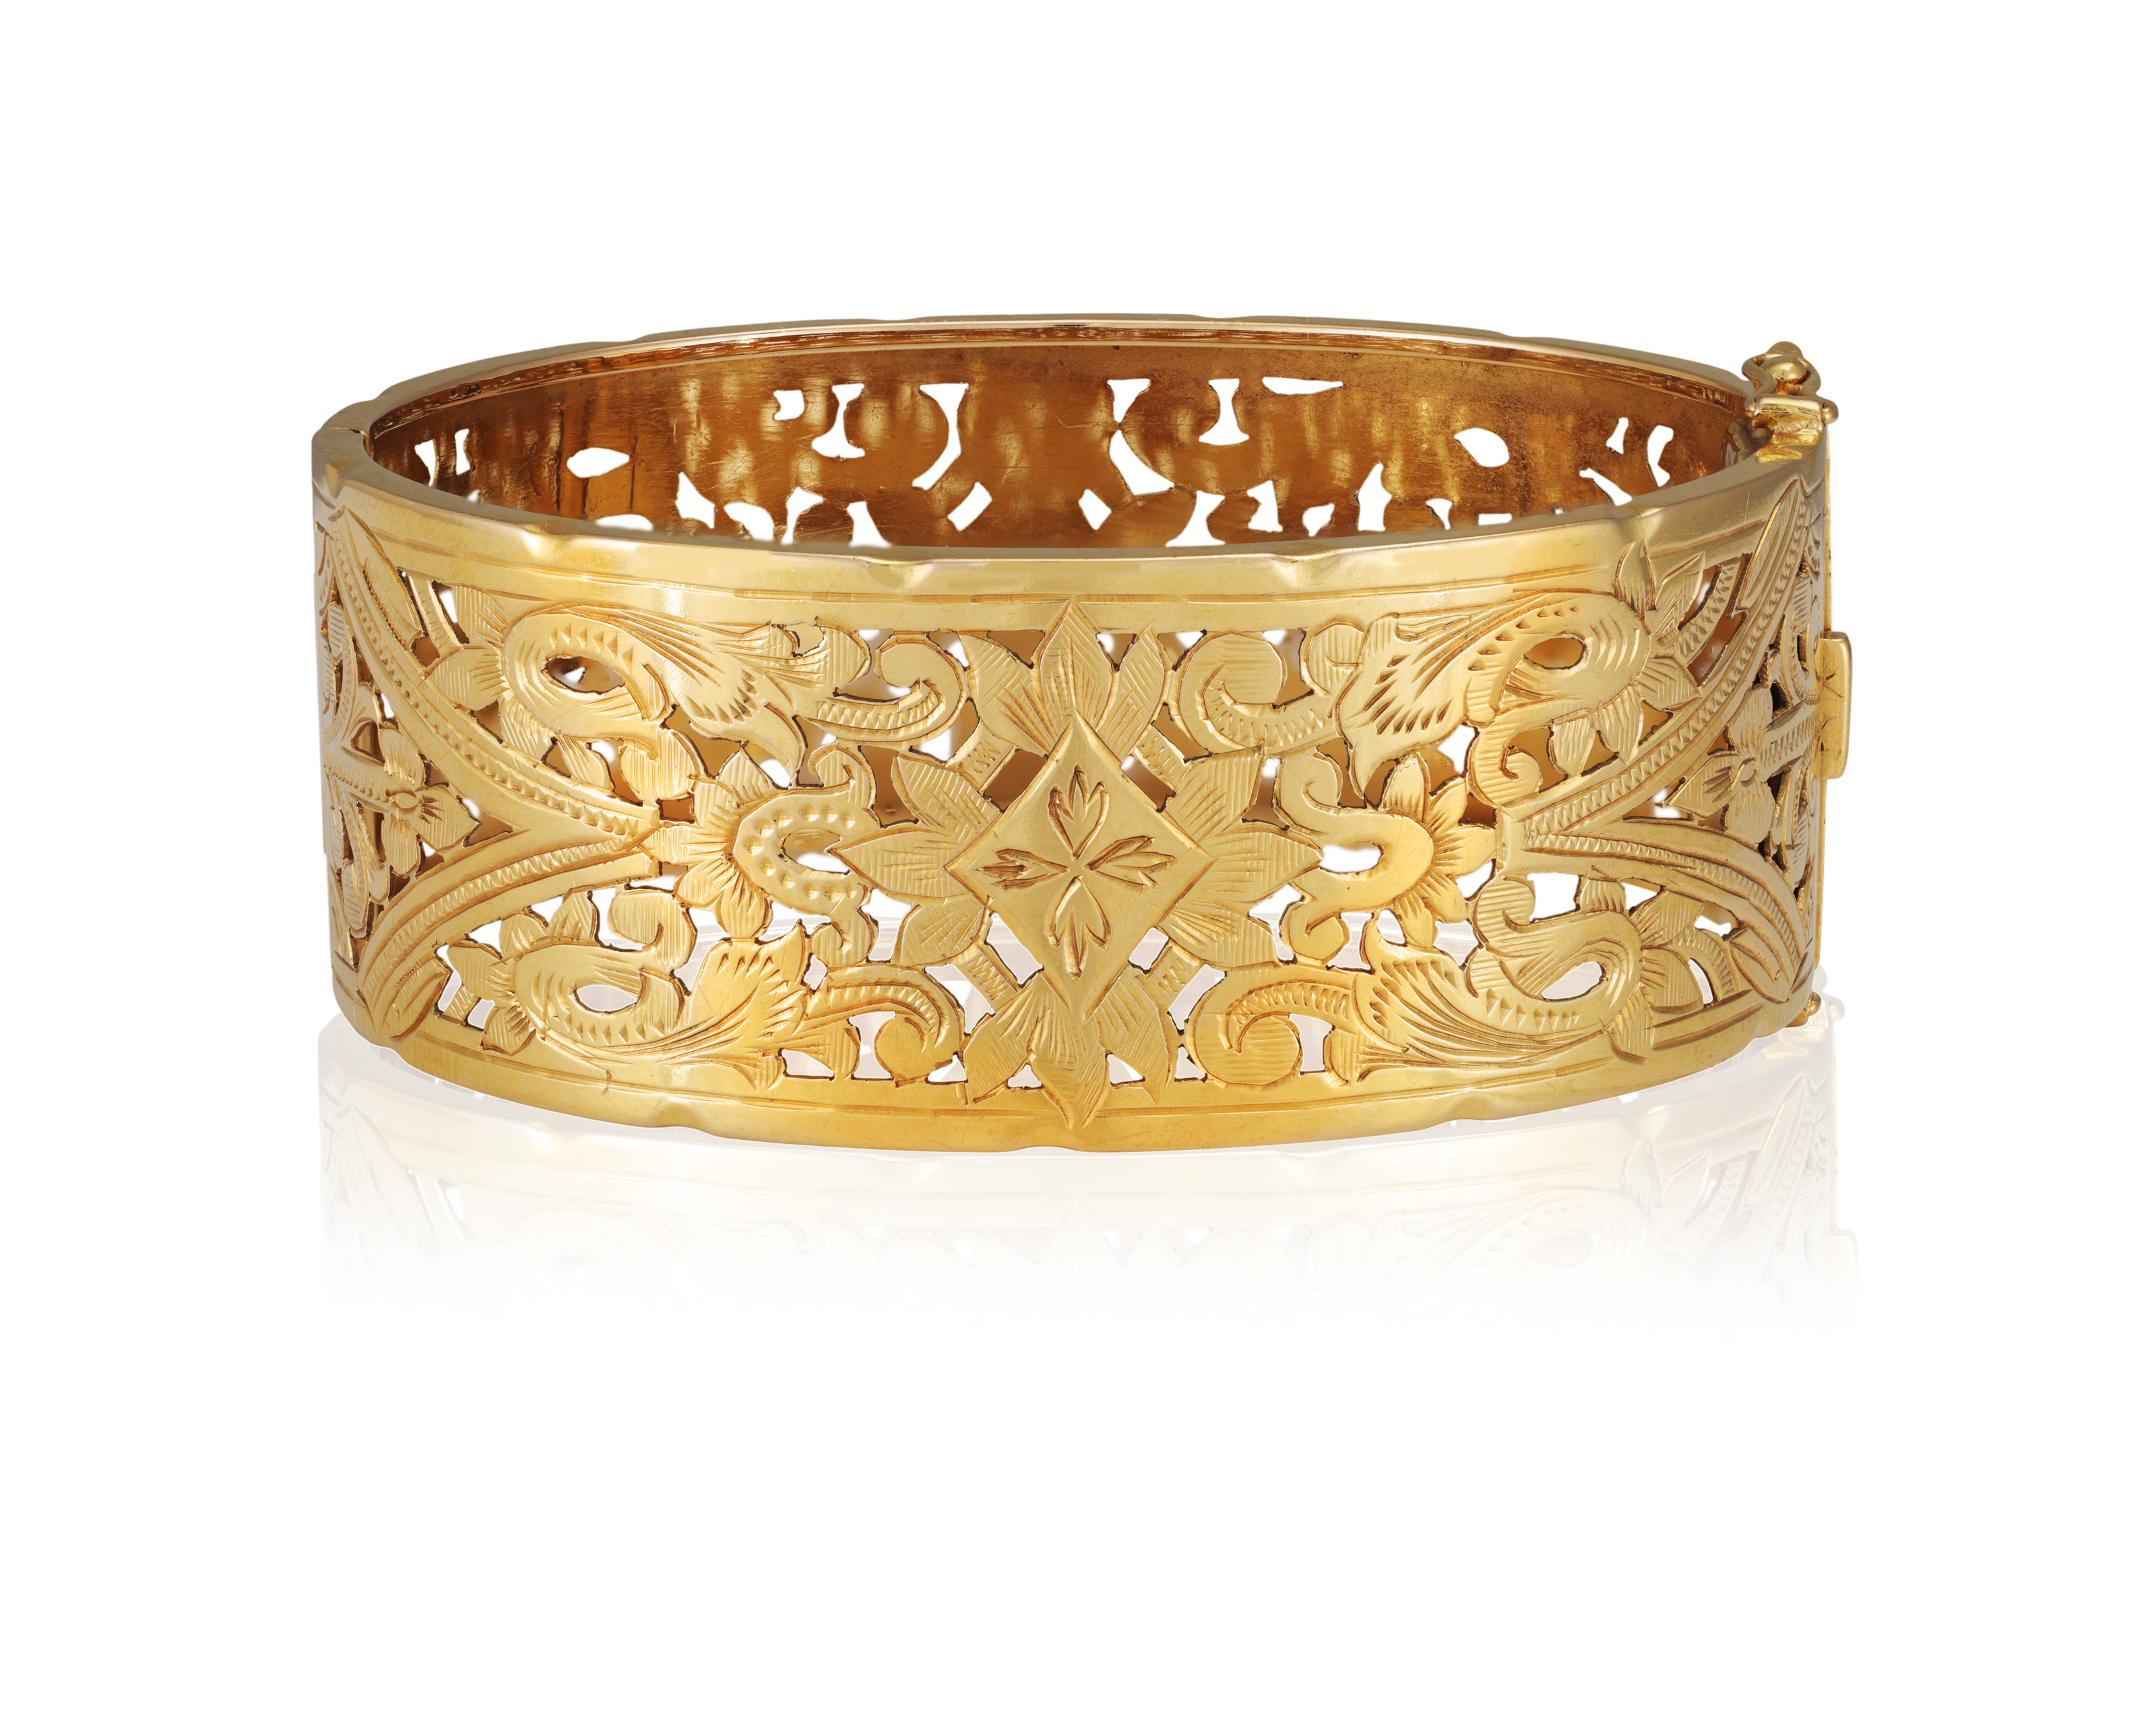 A GOLD CUFF BRACELET, FIRST HALF OF 20TH CENTURY, FRENCH Of openwork design, the hinged bangle - Image 2 of 3